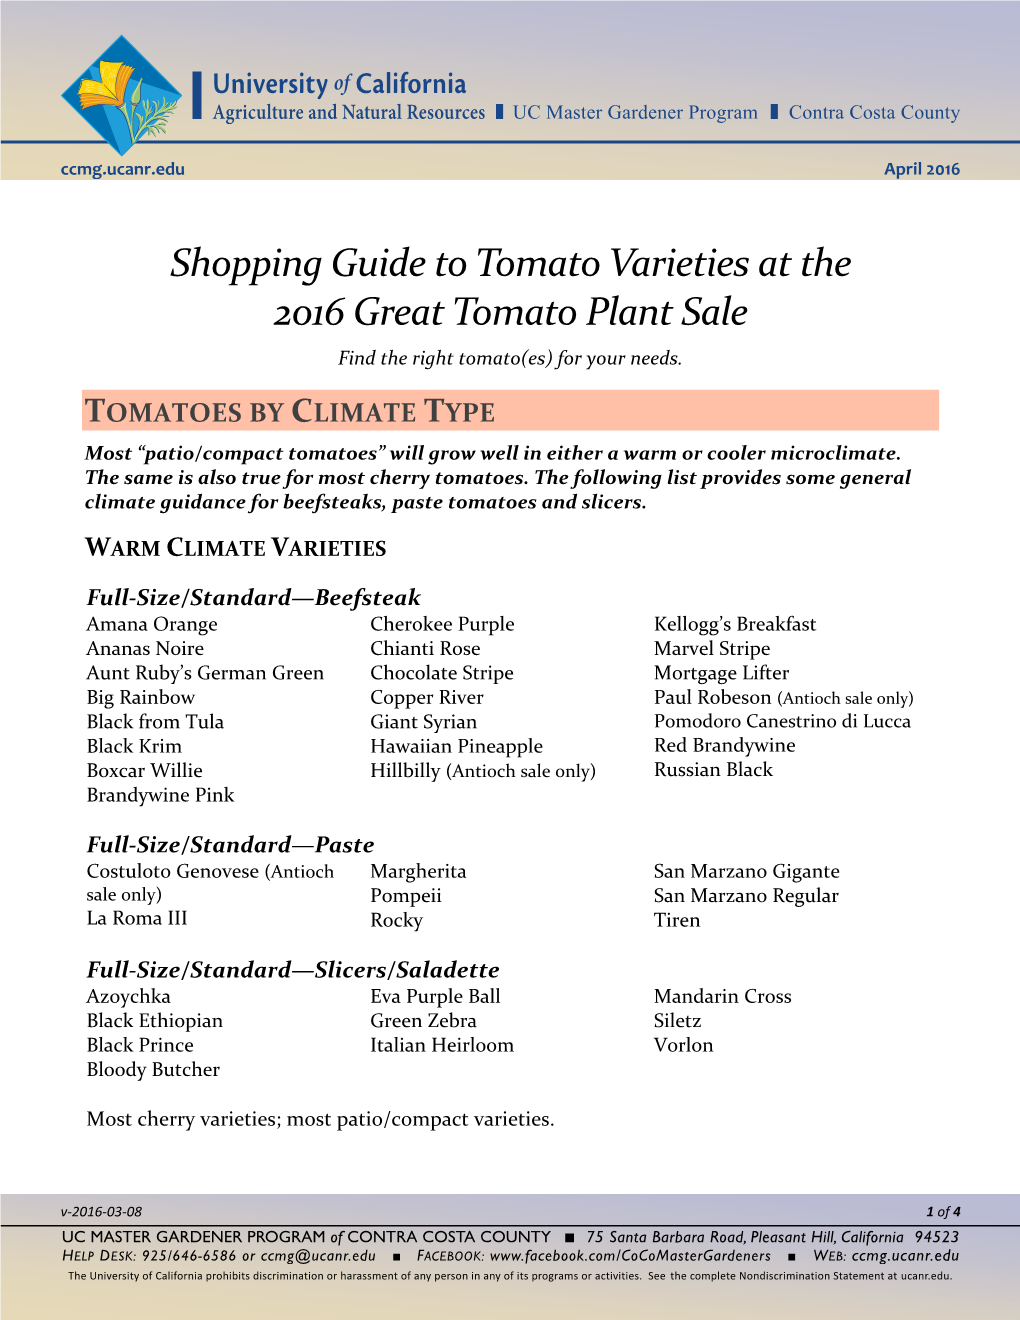 Shopping Guide to Tomato Varieties at the 2016 Great Tomato Plant Sale Find the Right Tomato(Es) for Your Needs